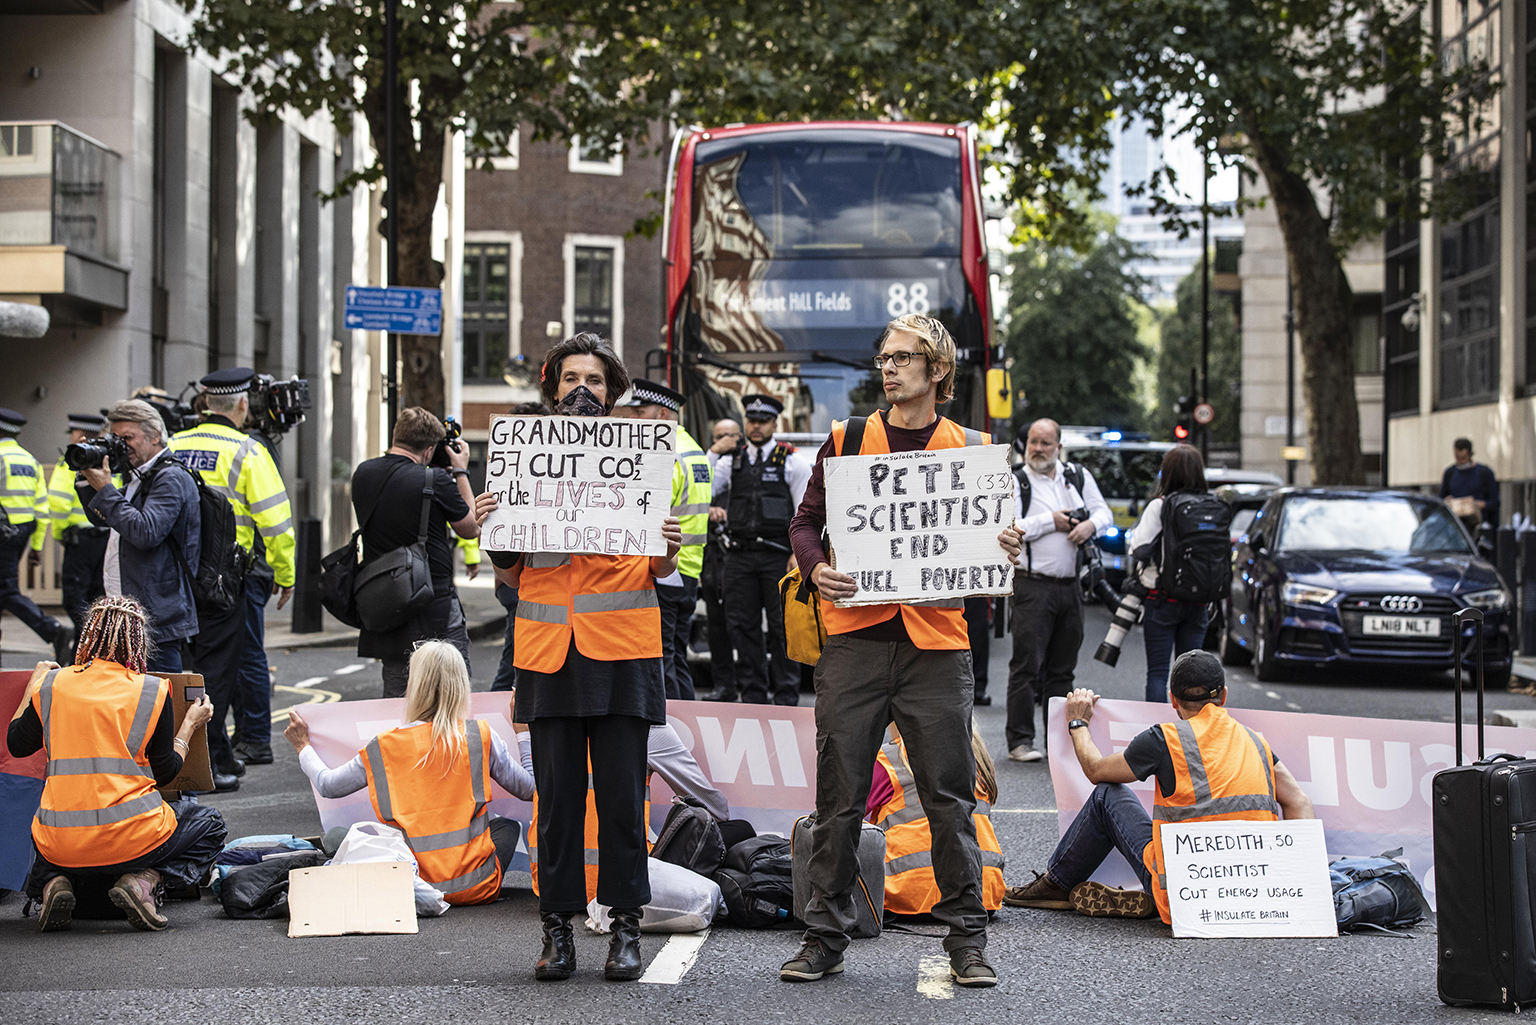 Insulate Britain protest outside the Home Office. Image: Jeff Gilbert/Shutterstock